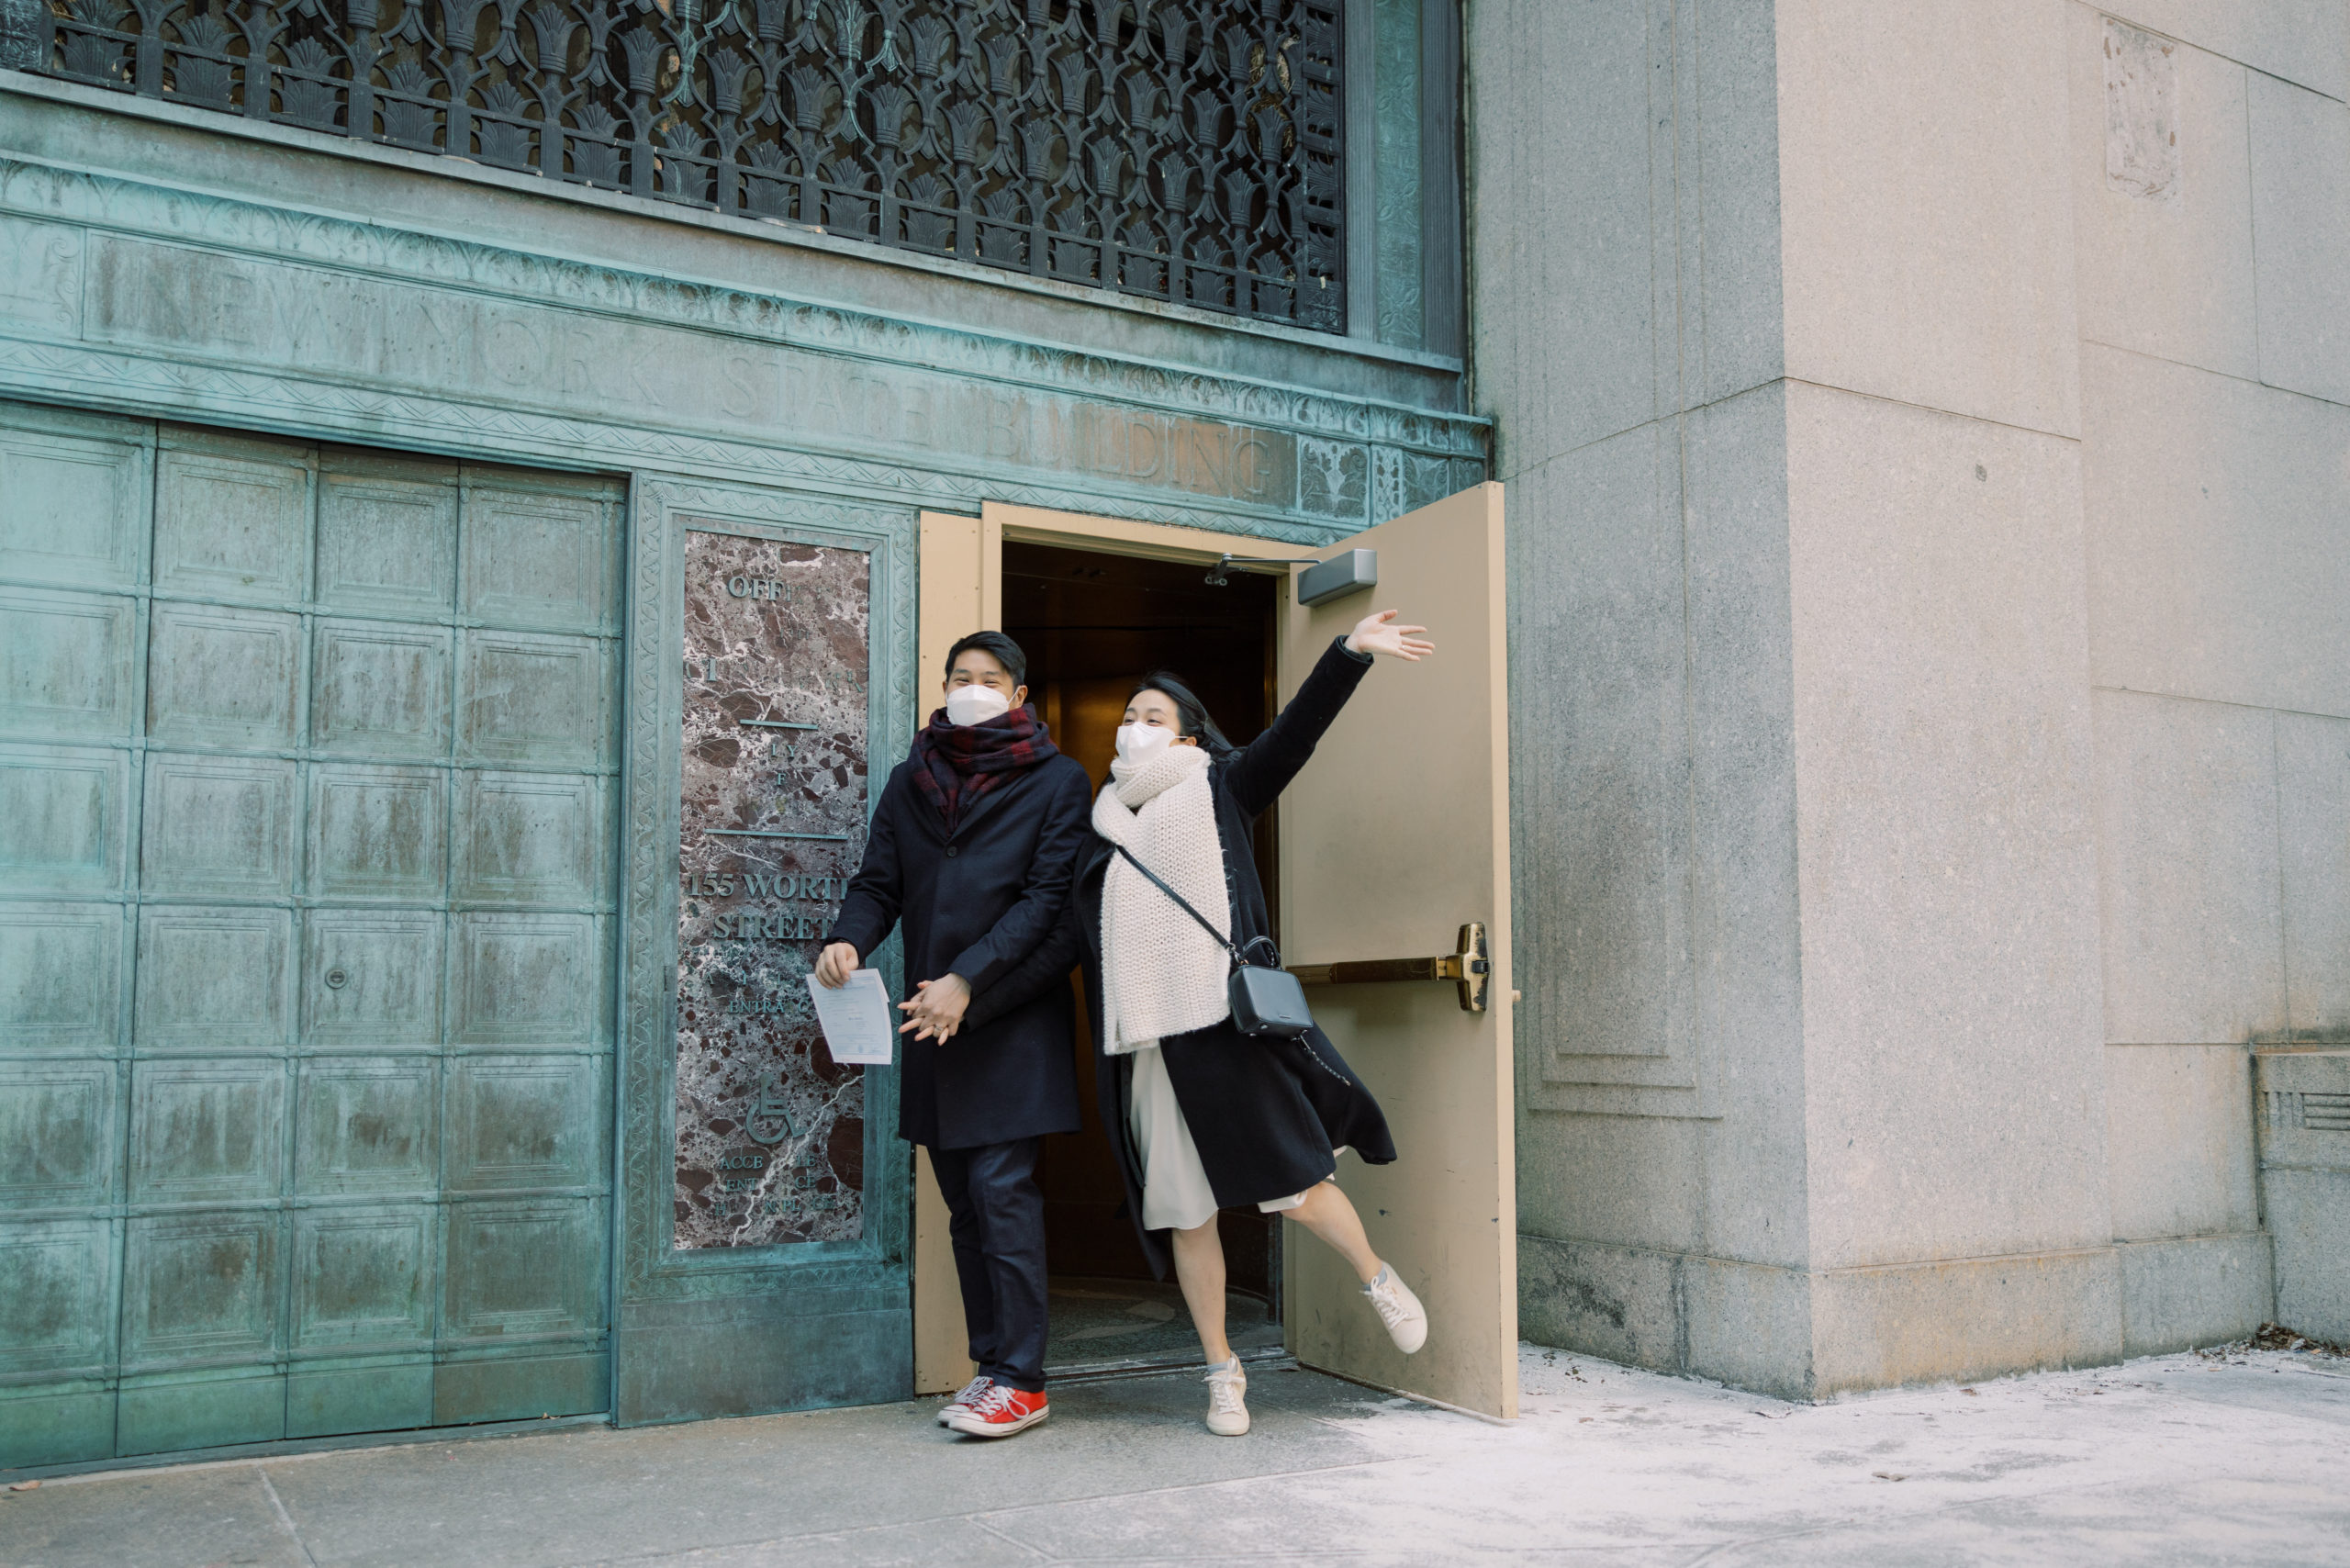 The newly-weds exit the door after the ceremony. NYC Christmas elopement image by Jenny Fu Studio